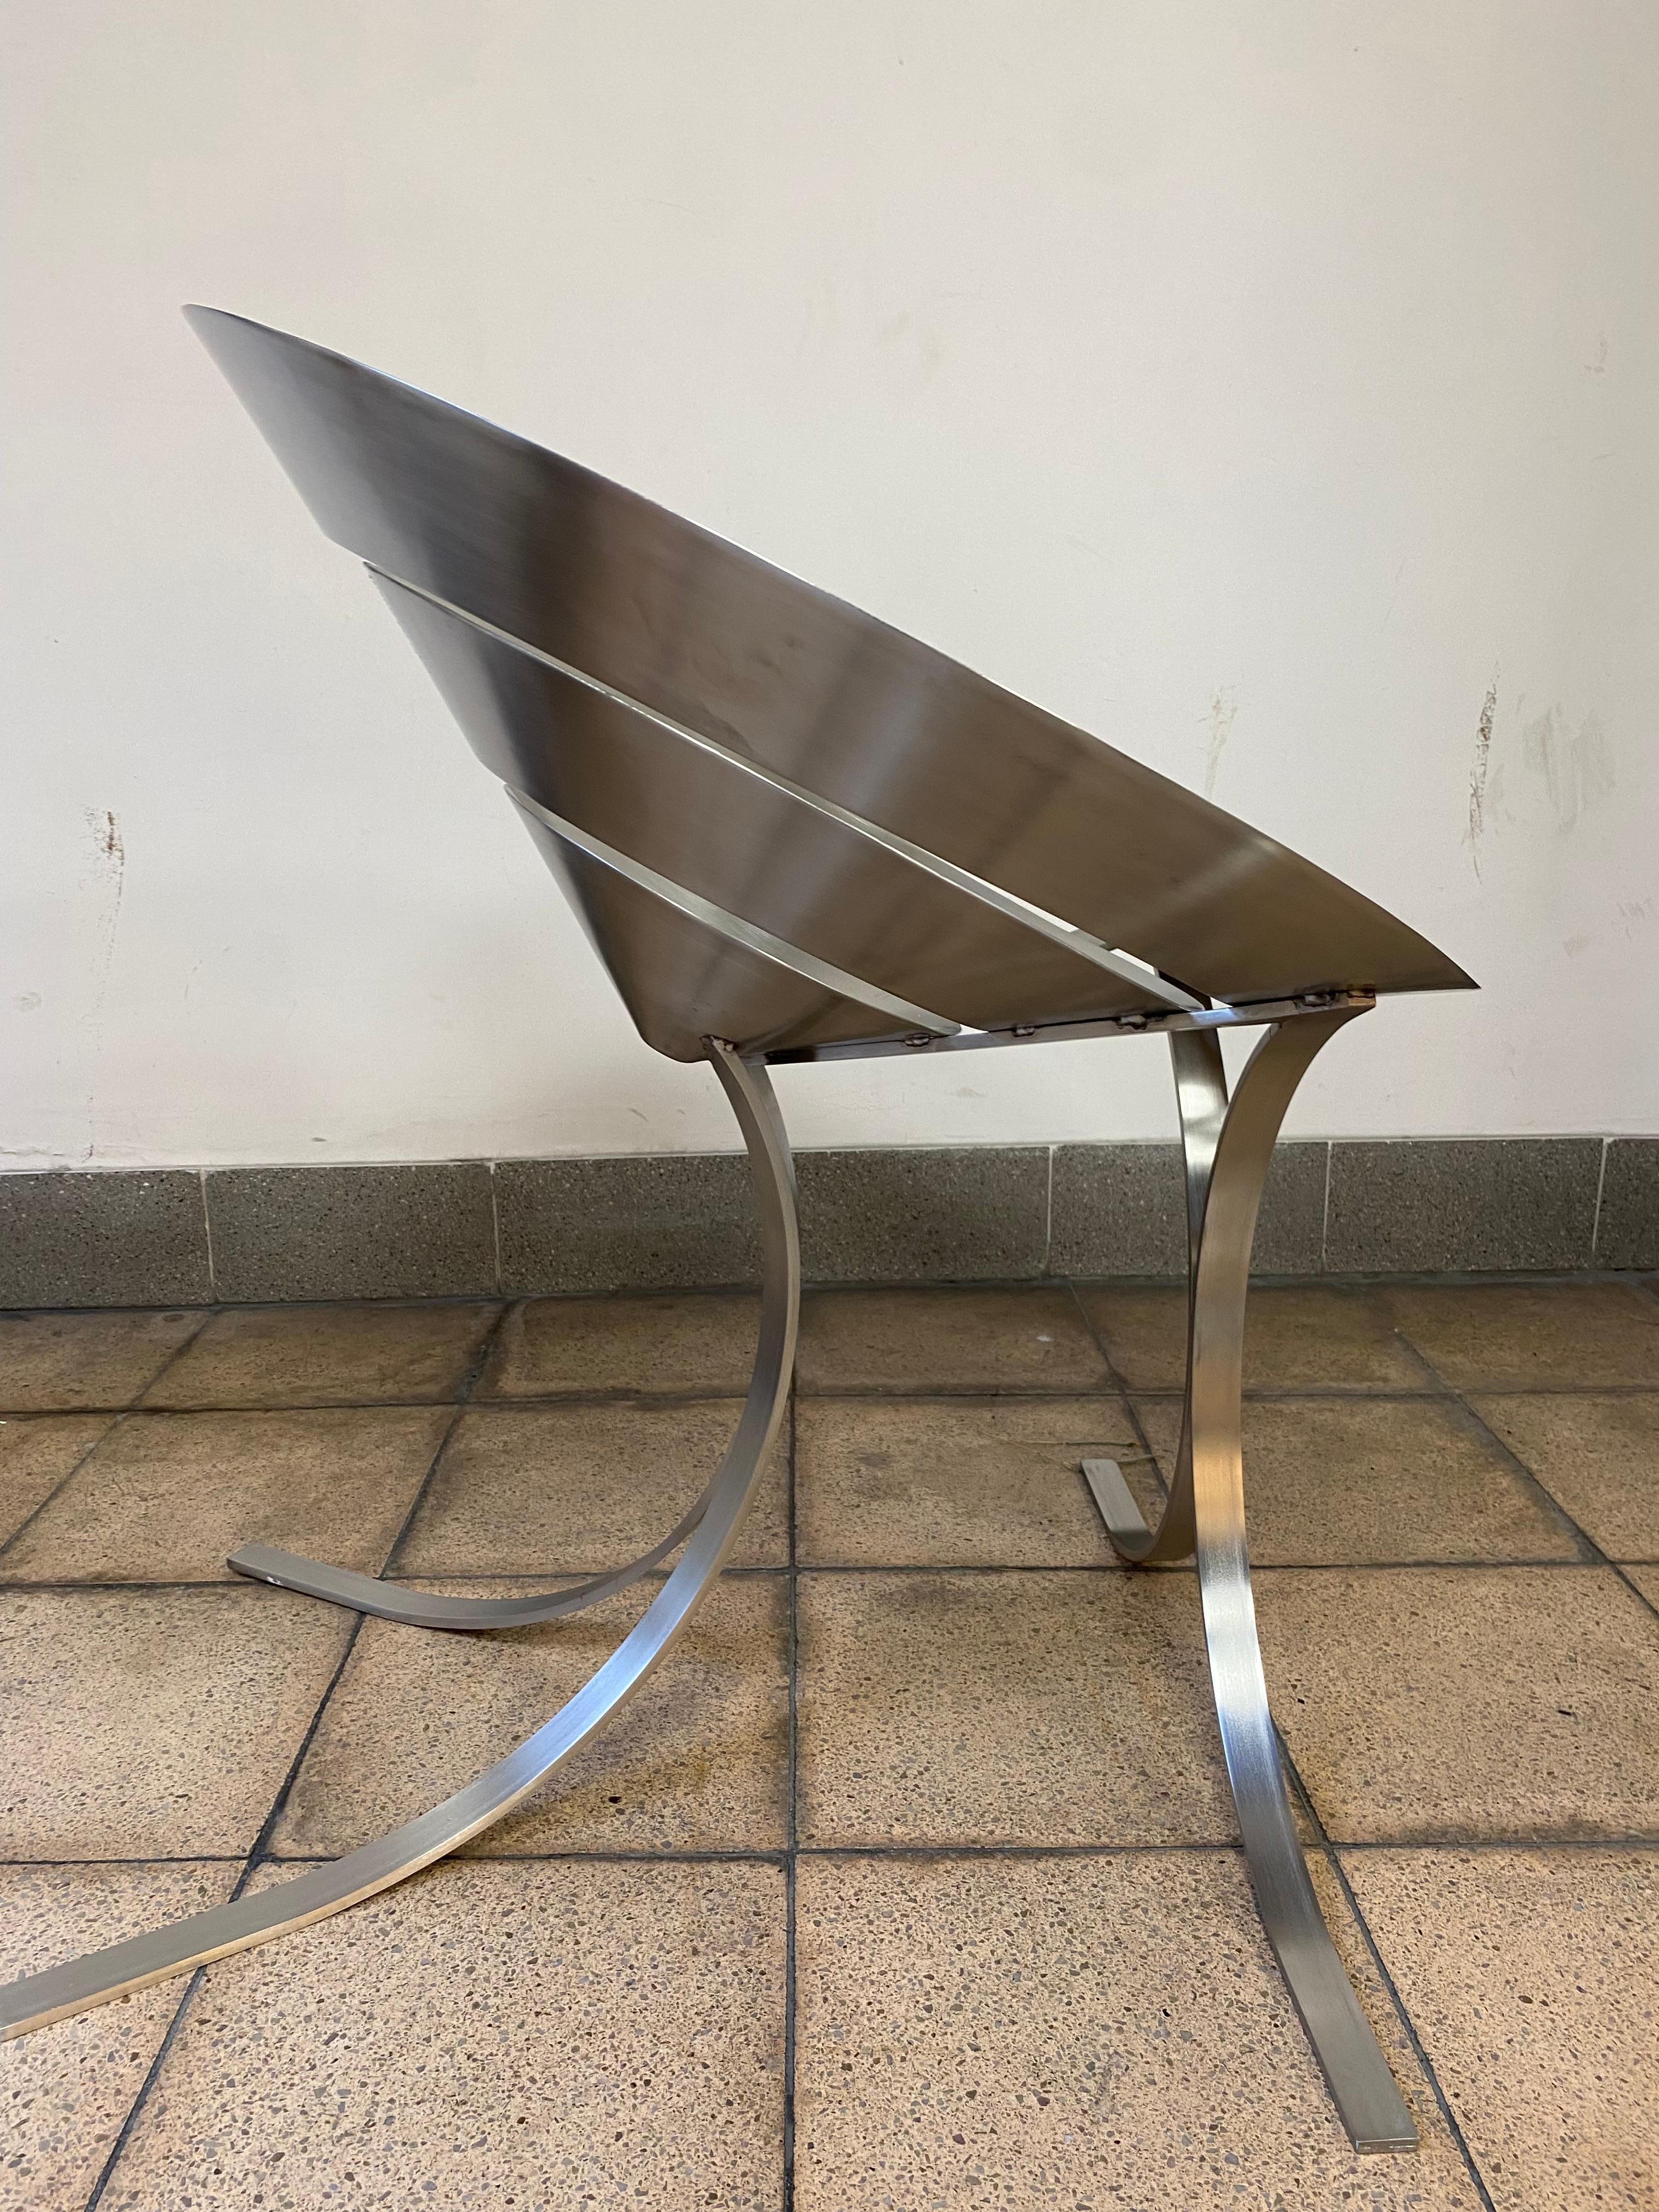 Stainless Steel Maria Pergay Chaise Anneaux / Ring Chair, 1968  For Sale